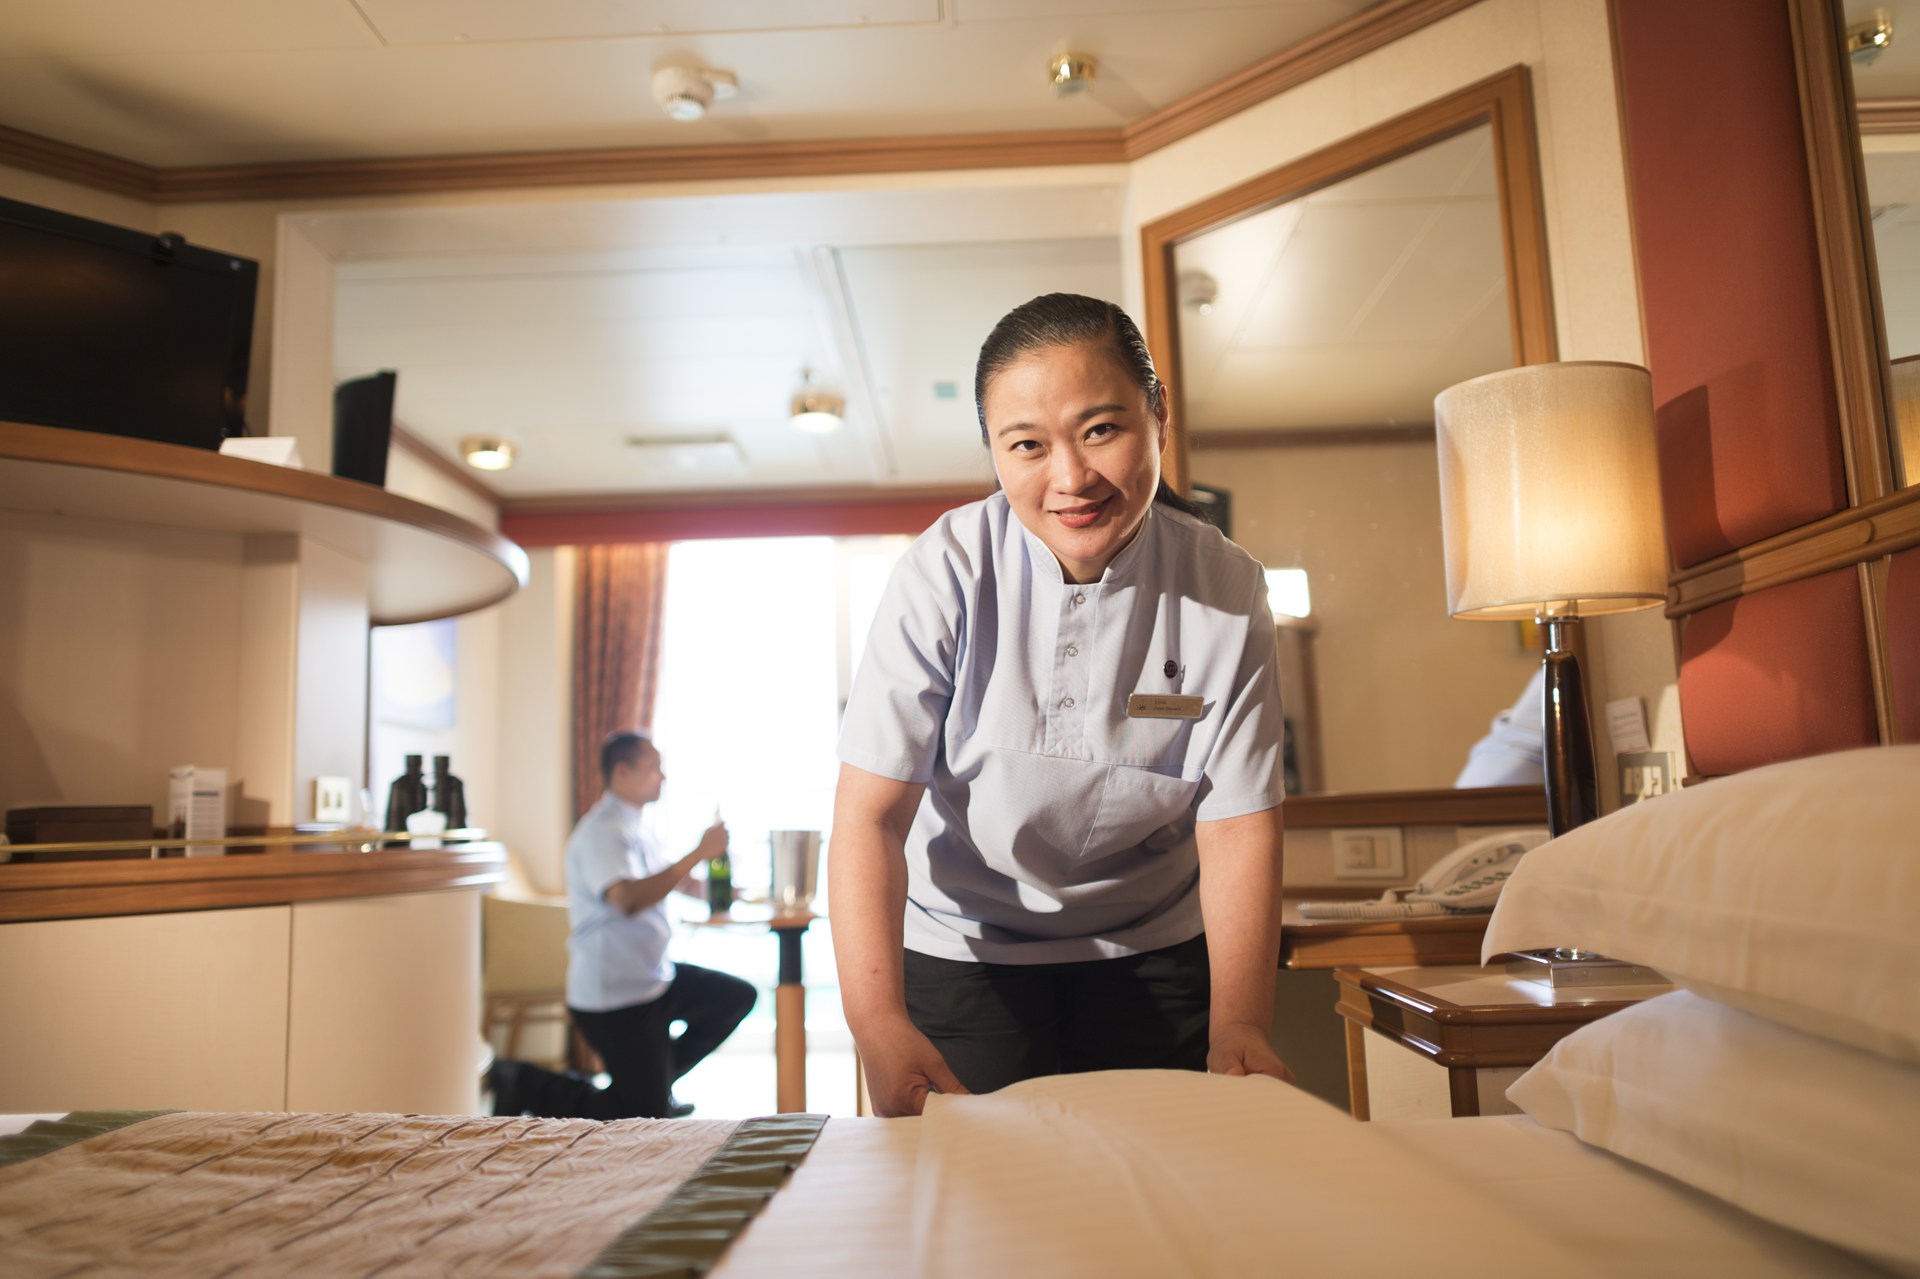 housekeeping interview for cruise ship